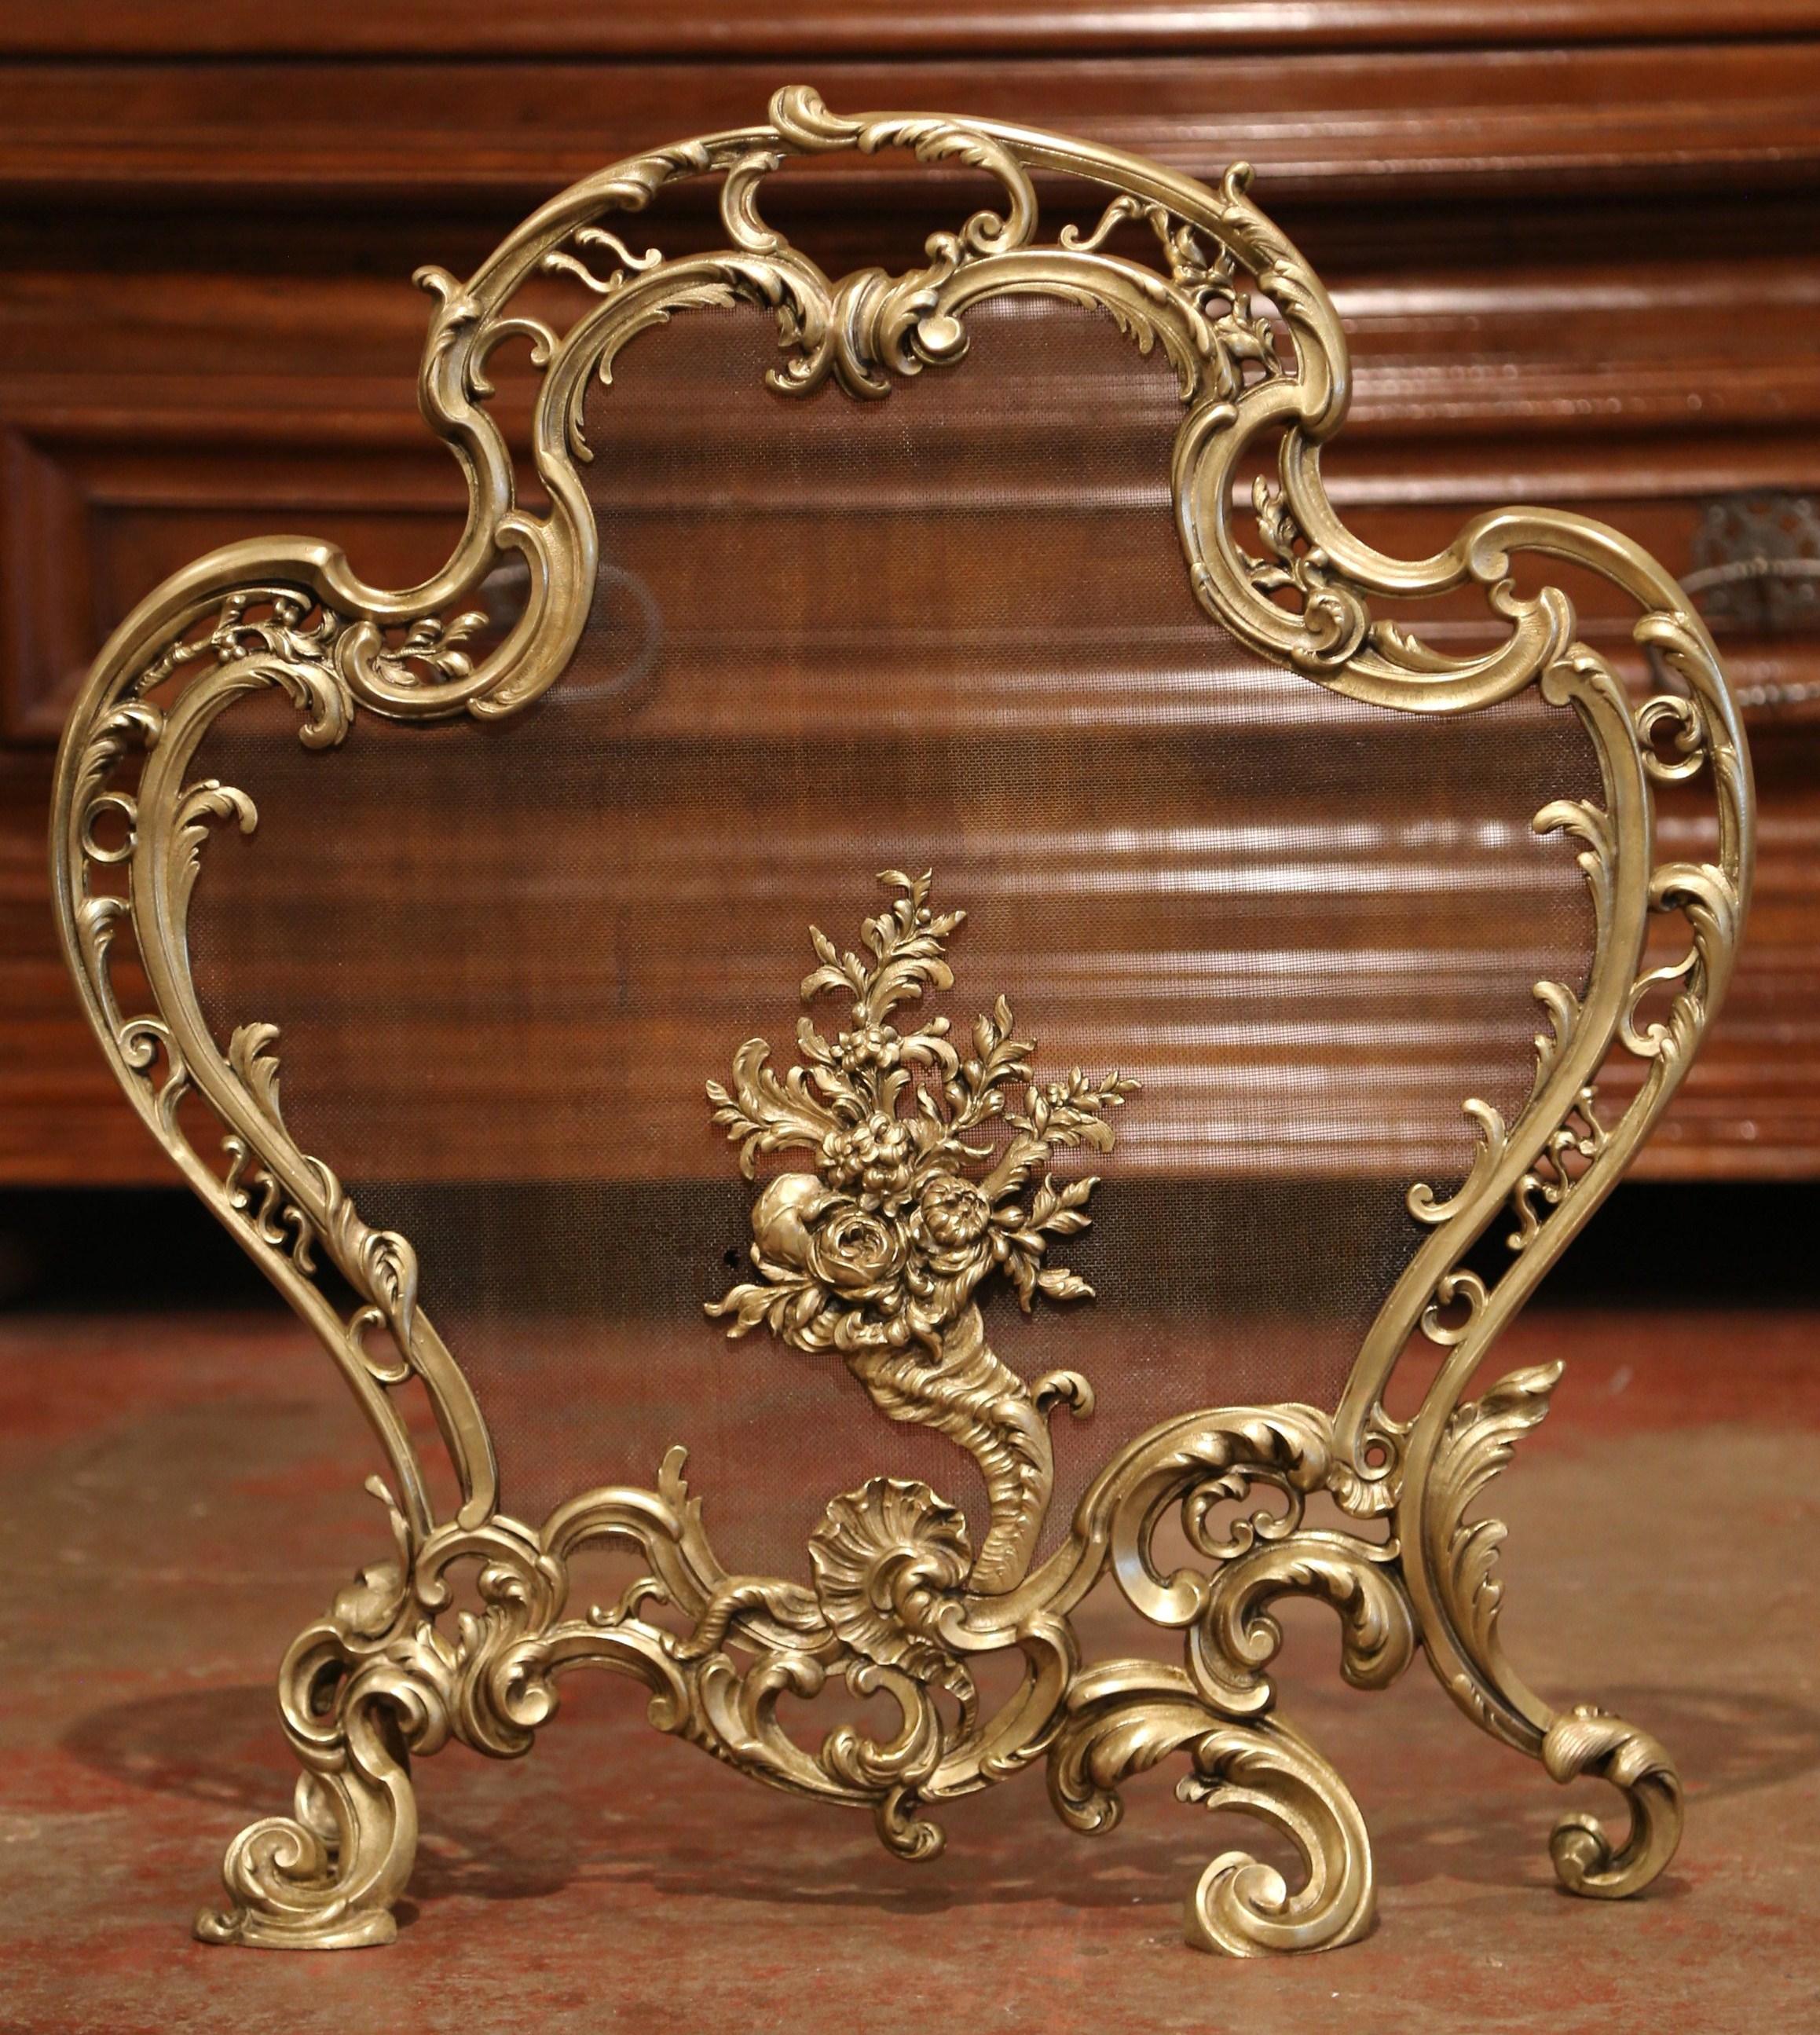 Hand-Crafted 19th Century French Louis XV Rococo Carved Patinated Bronze Fireplace Screen